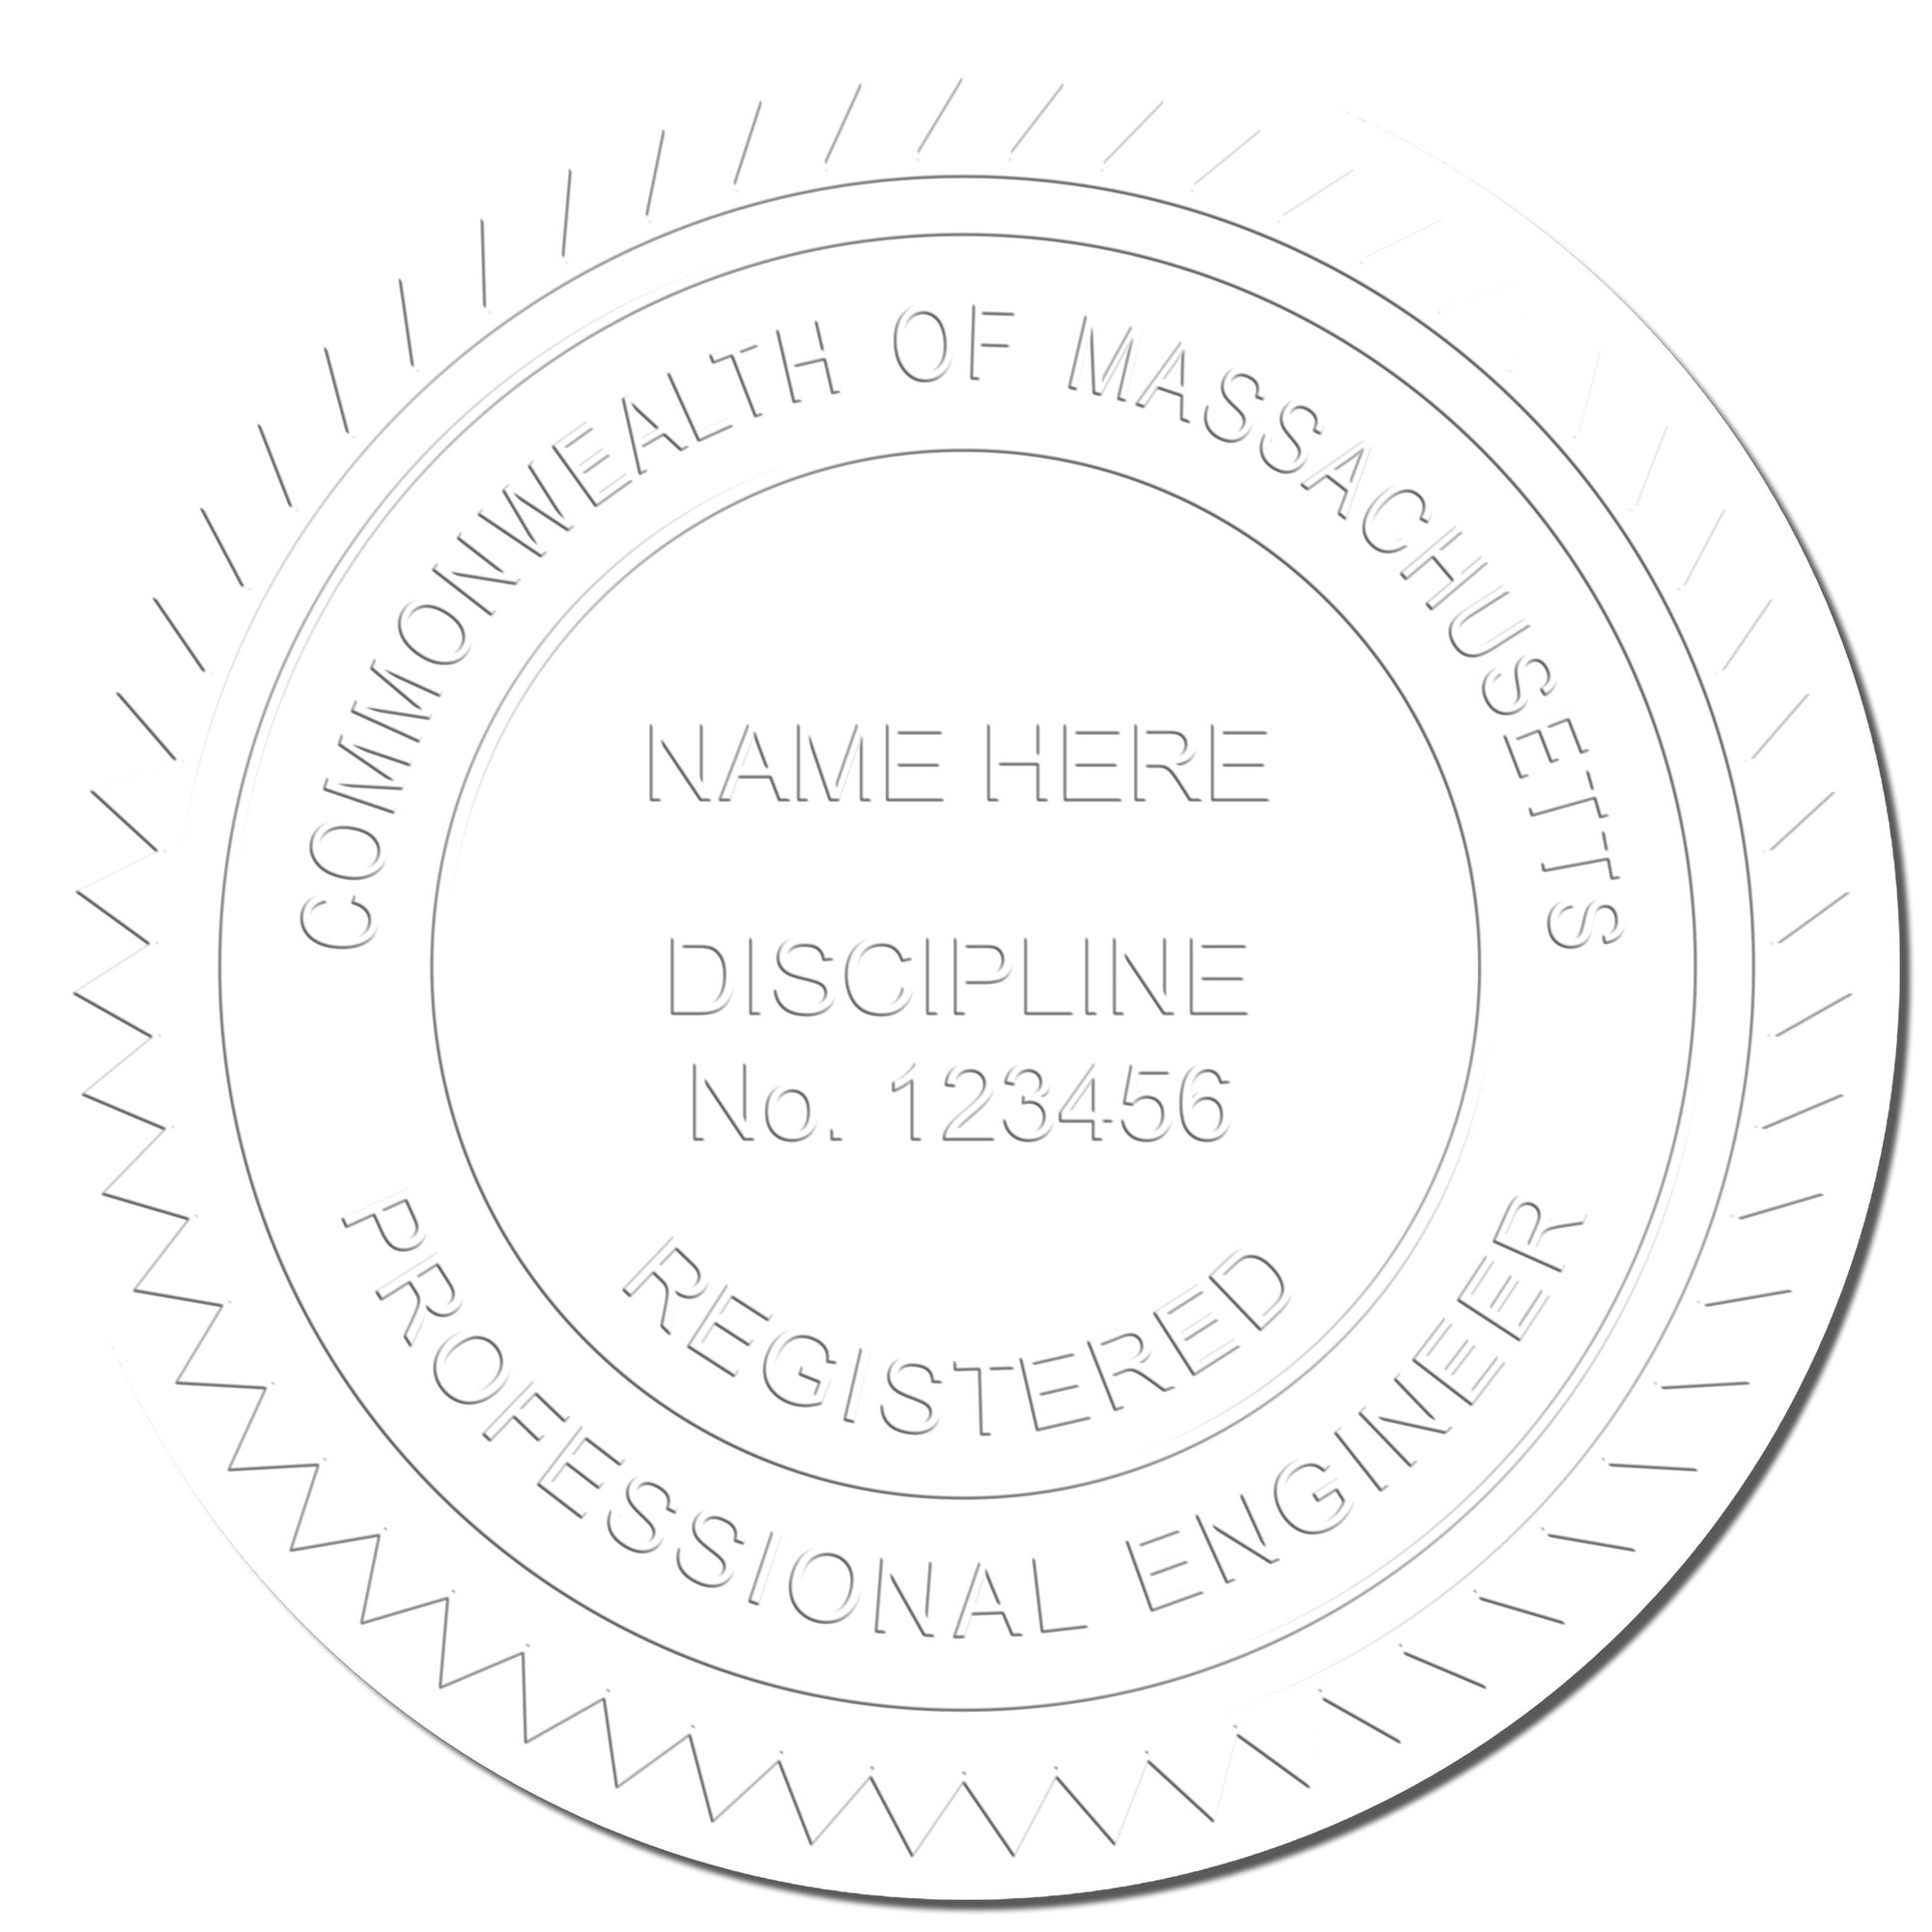 The main image for the Massachusetts Engineer Desk Seal depicting a sample of the imprint and electronic files